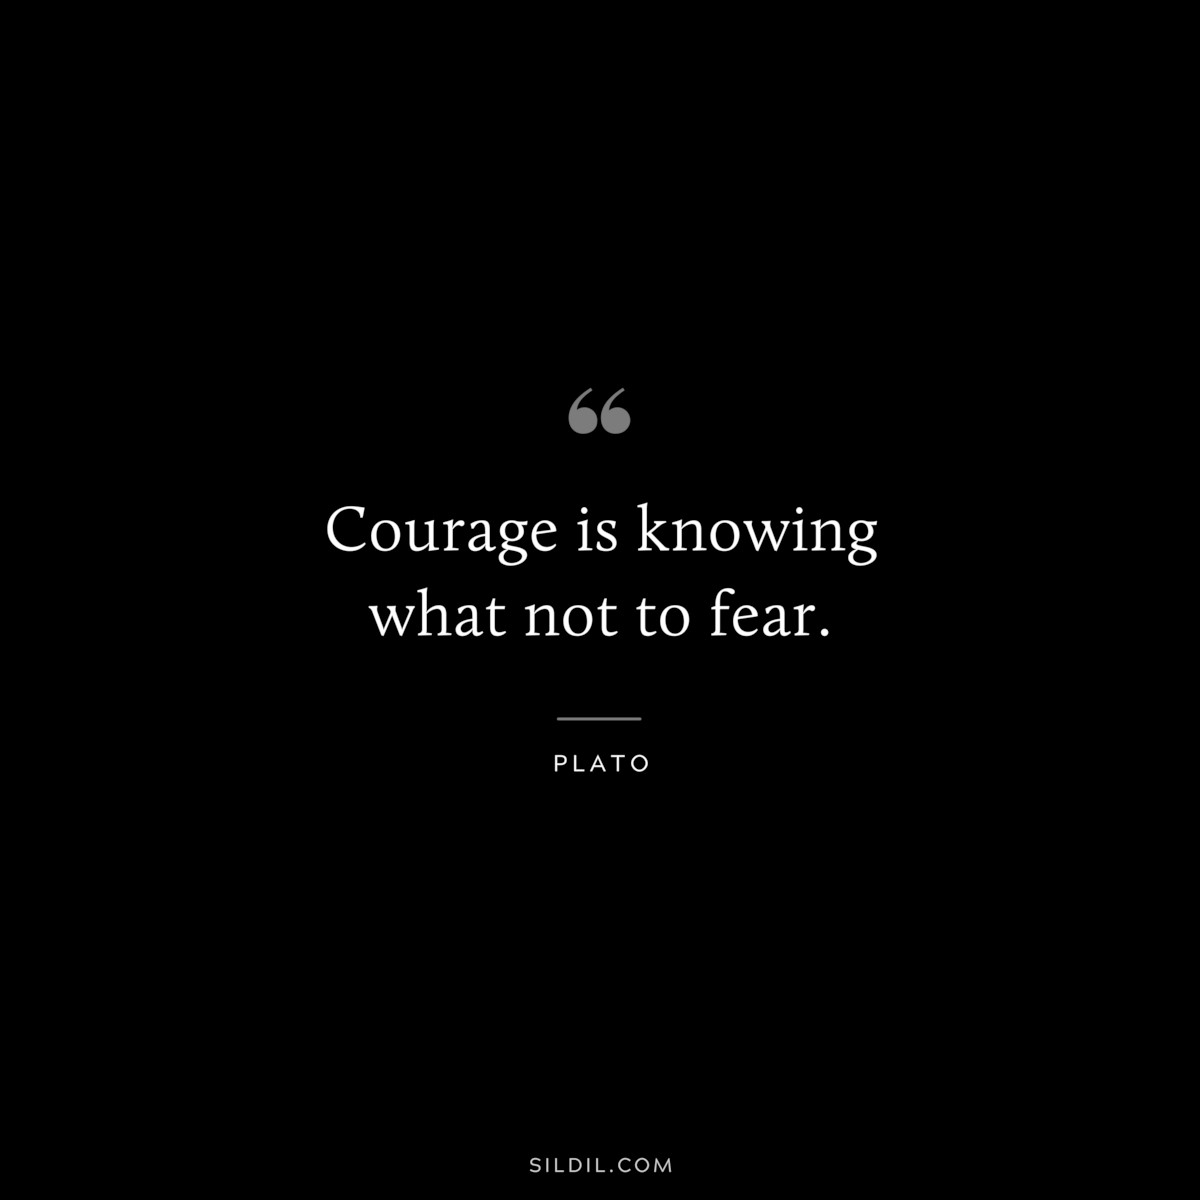 Courage is knowing what not to fear. ― Plato